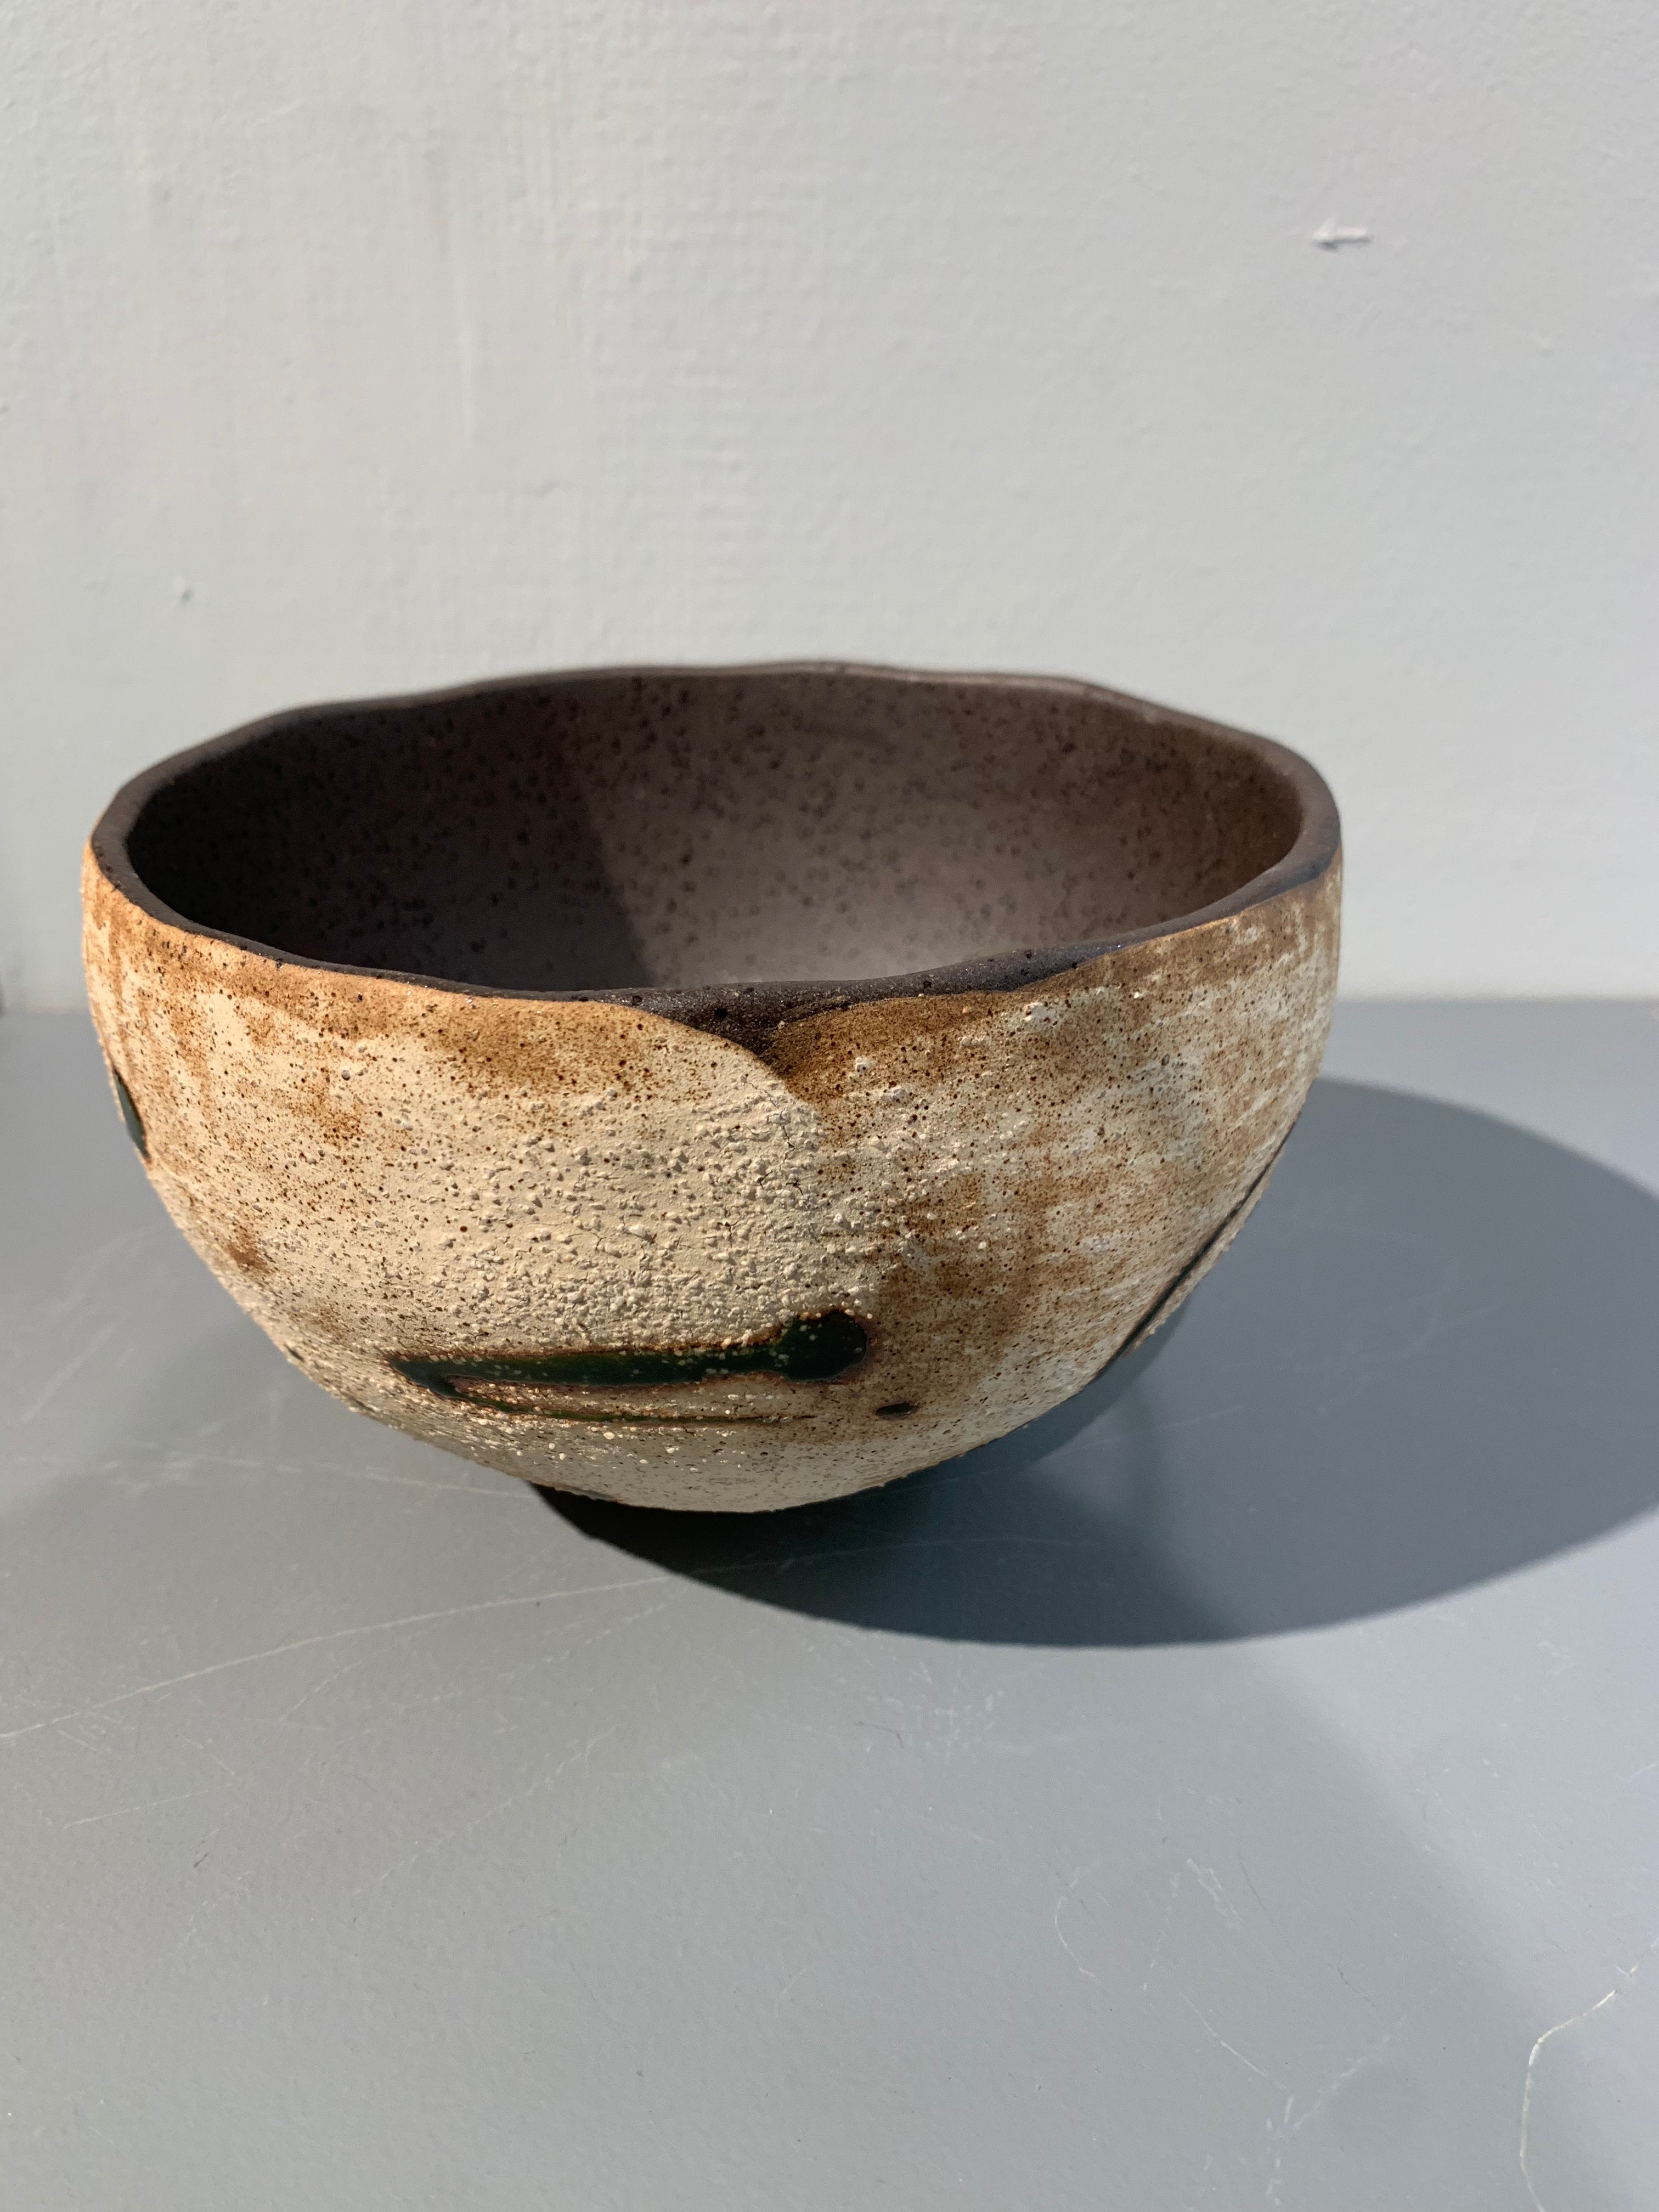 Brown noodle bowl with rough surface